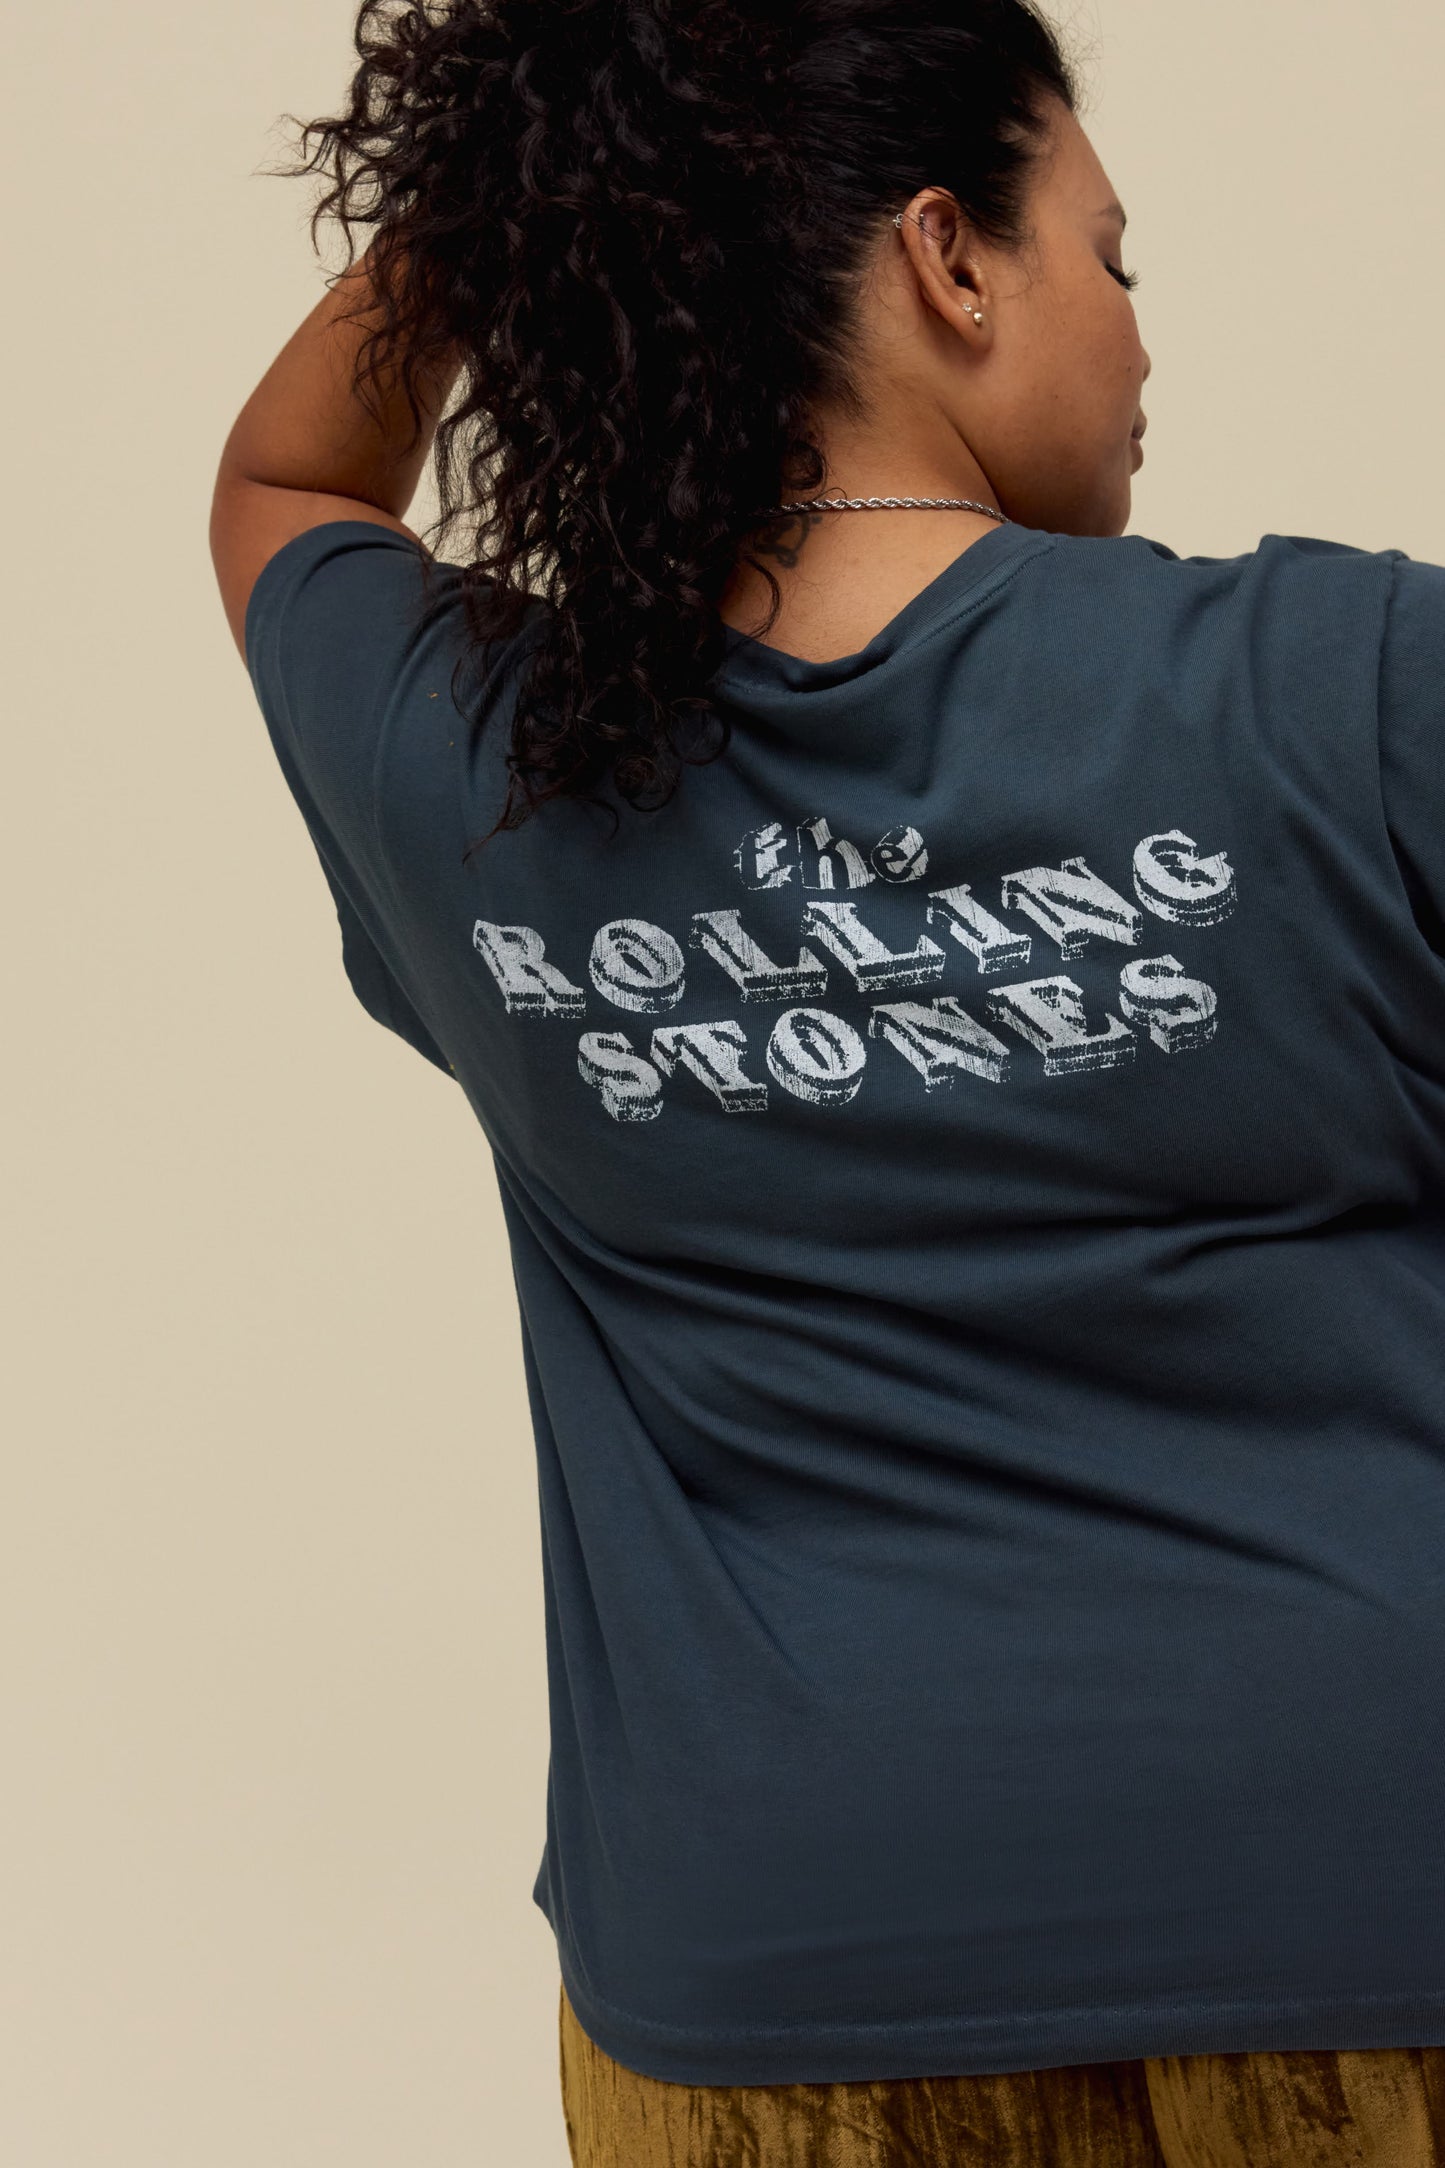 A model featuring a vintage black tee stamped with the rolling stones and a tounge  graphic on the center.